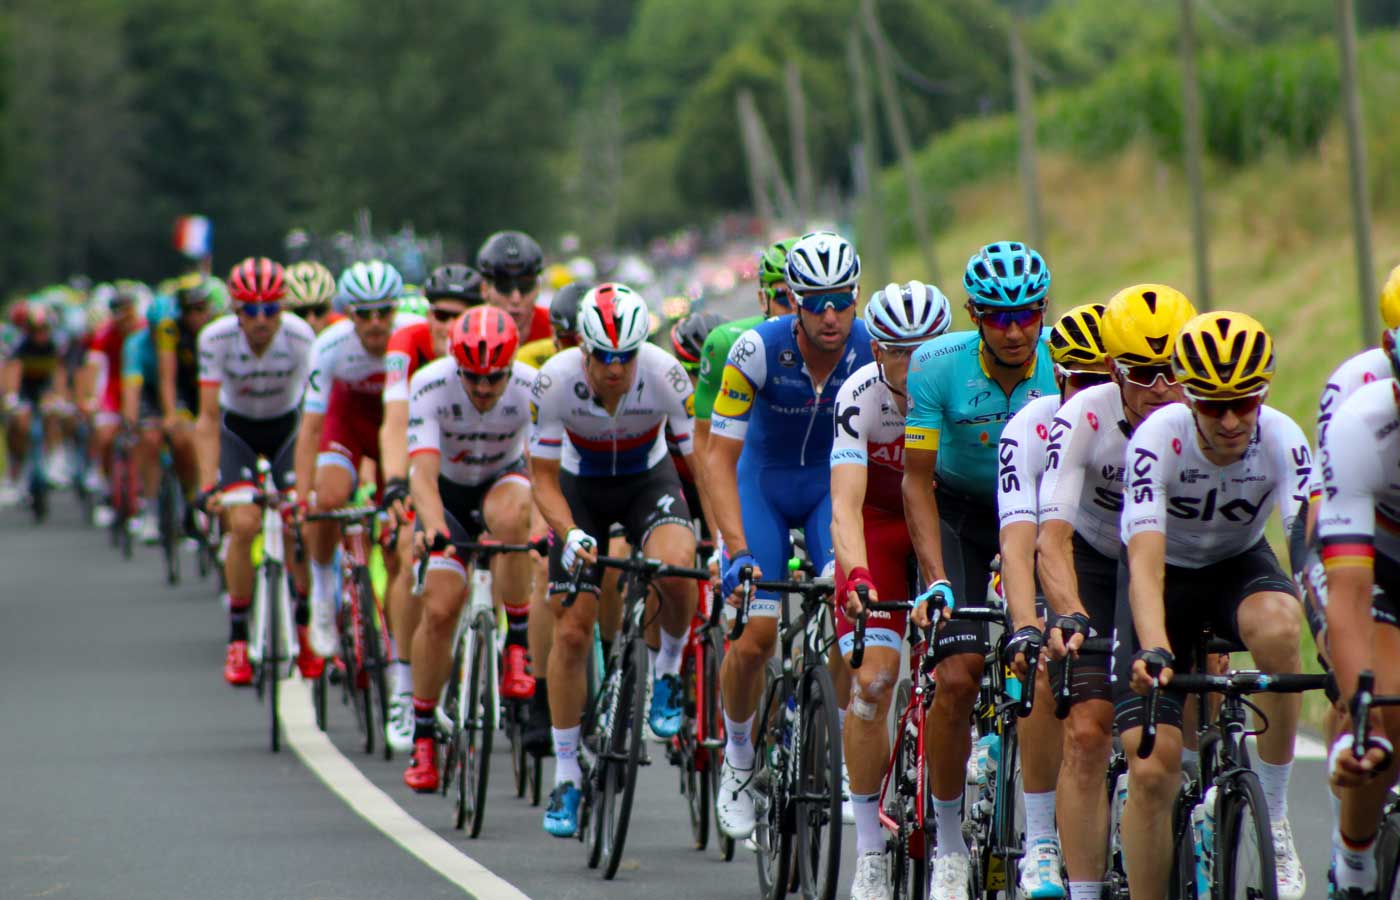 Sports event insurance - Shows a group of cyclists in a road race